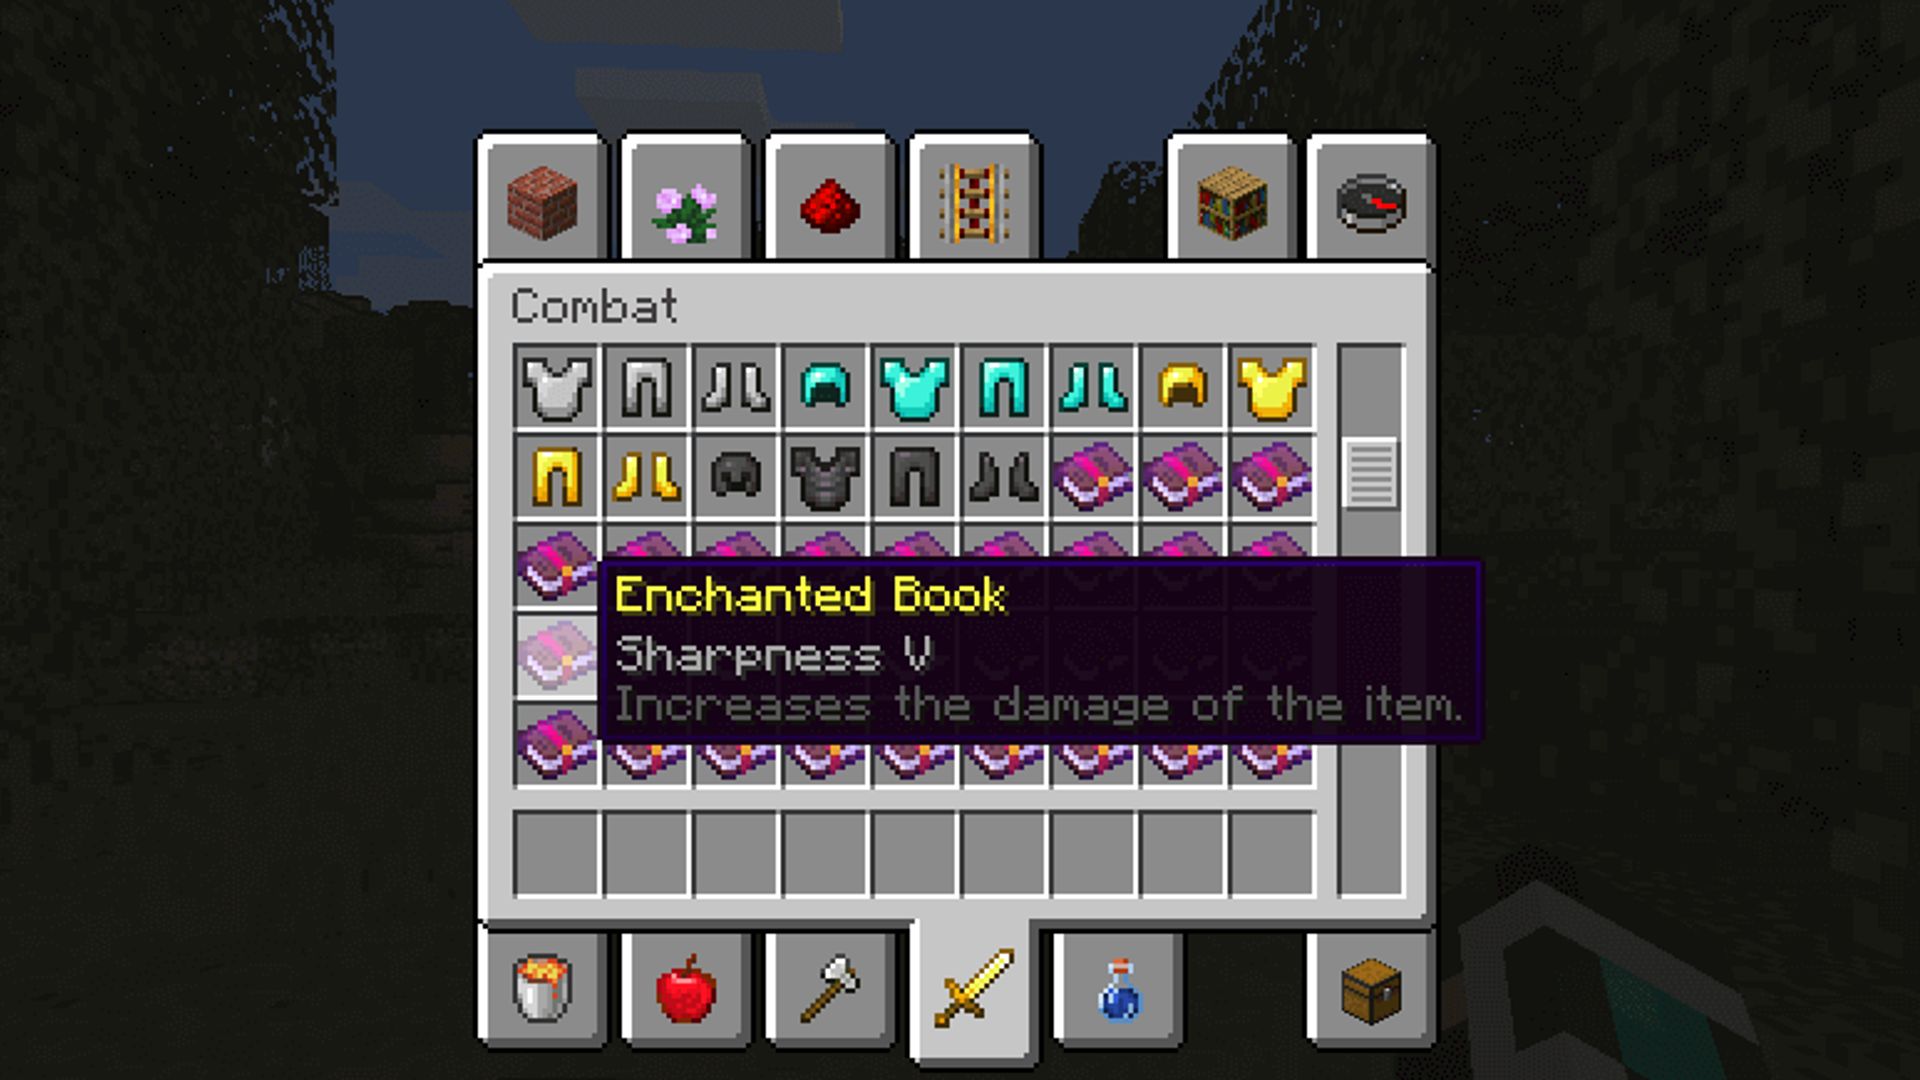 Best Minecraft mods: the inventory screen highlighting the Enchanted Book. Its description reads: Sharpness V - Increases the damage of the item.